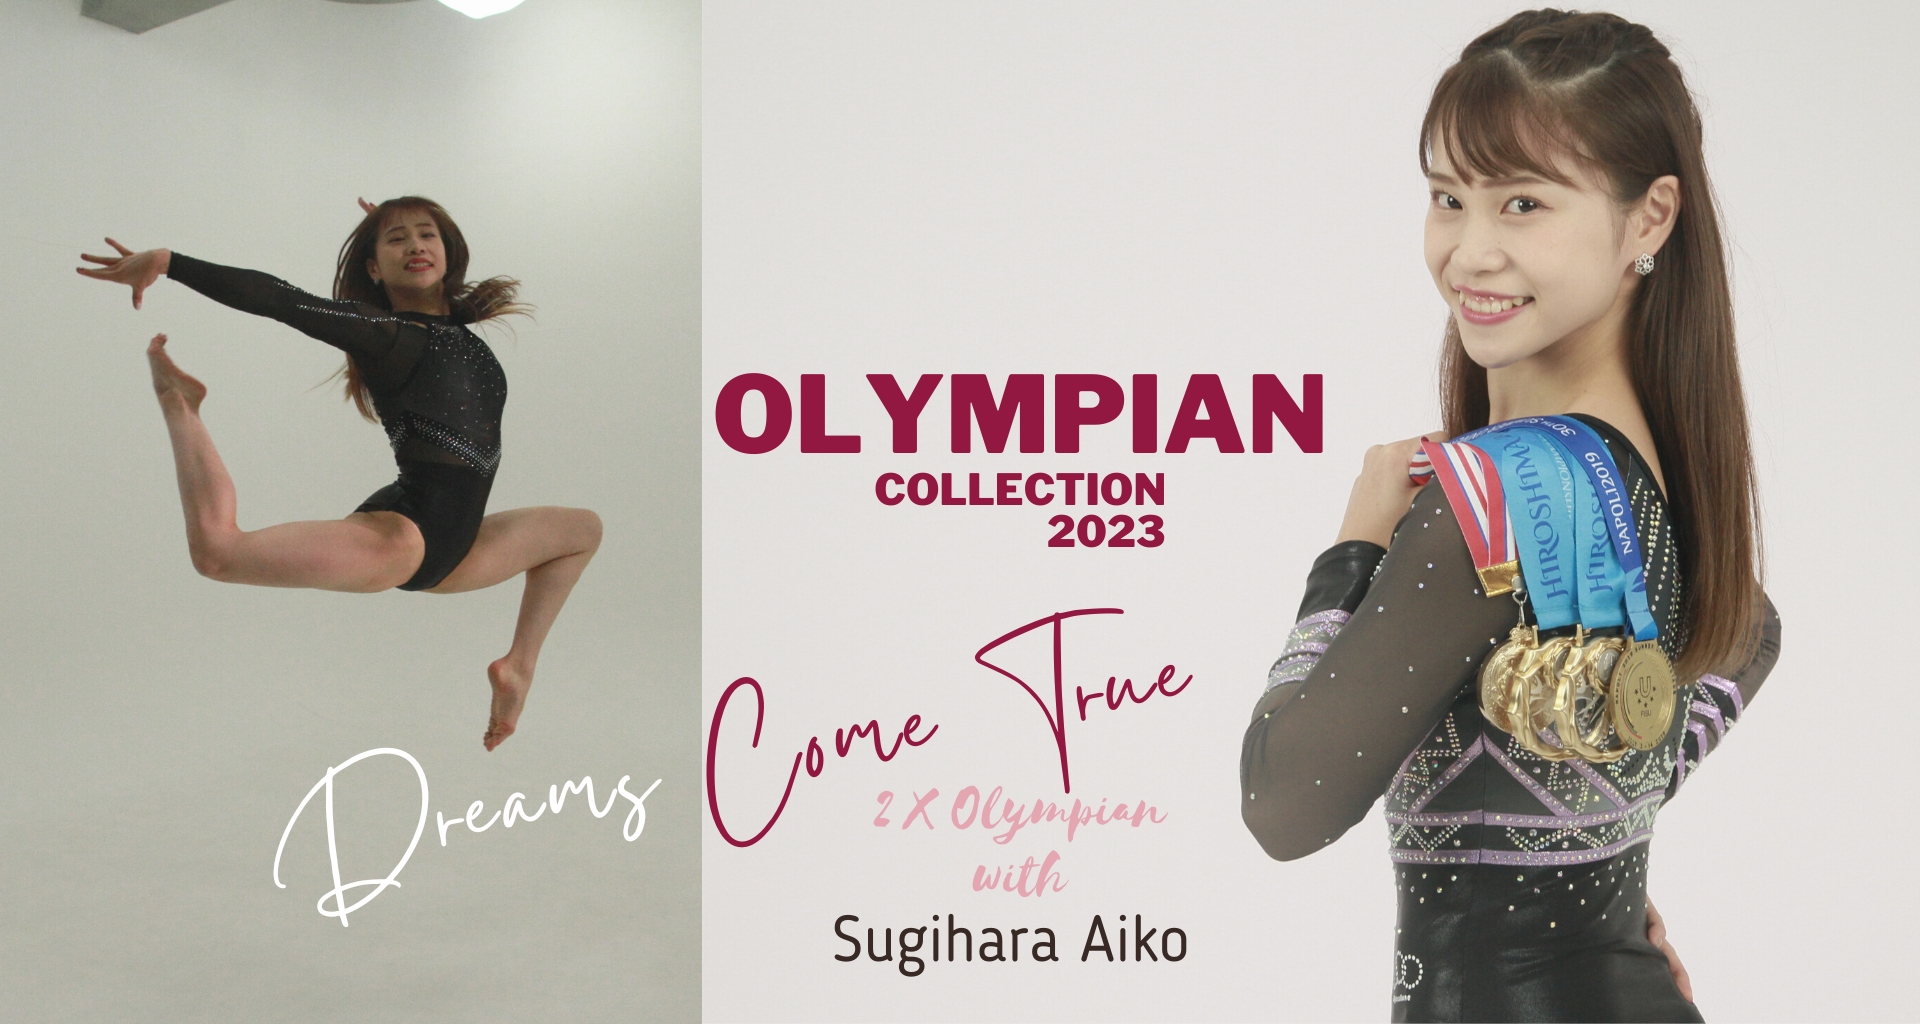 OlympianCollection